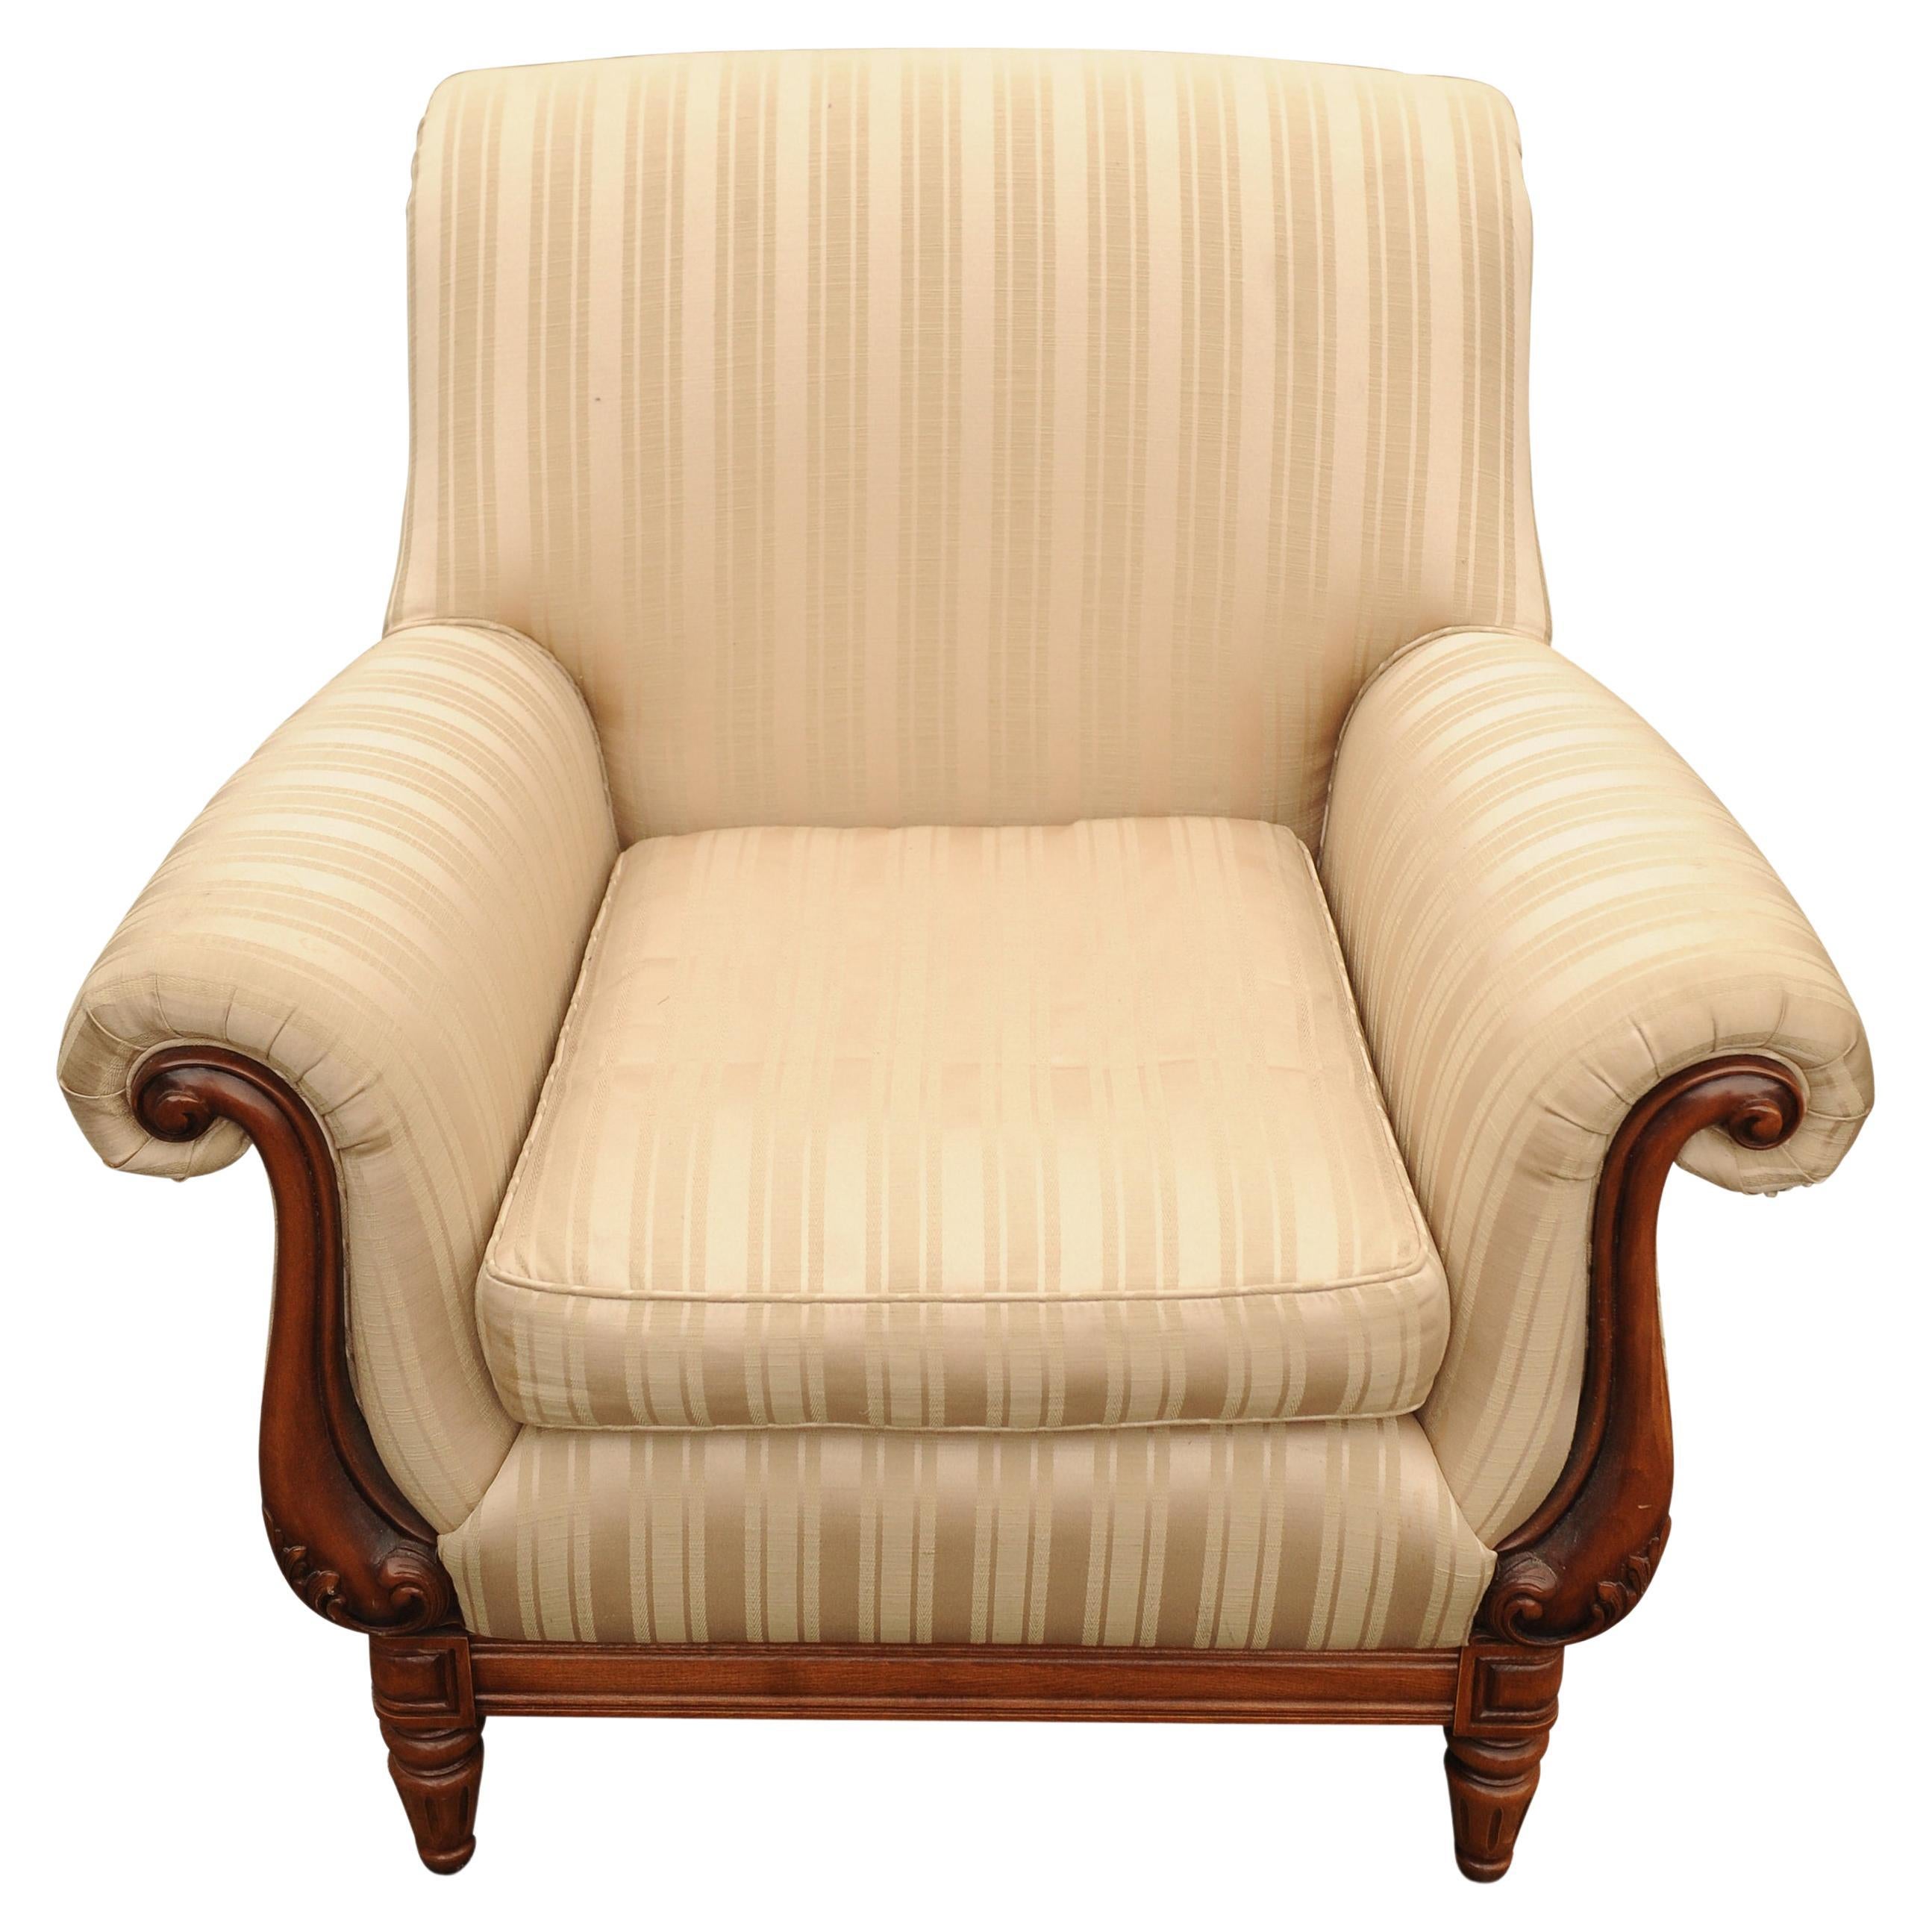 A William IV Empire Design Library Armchair Striped Cream Silk Upholstery For Sale